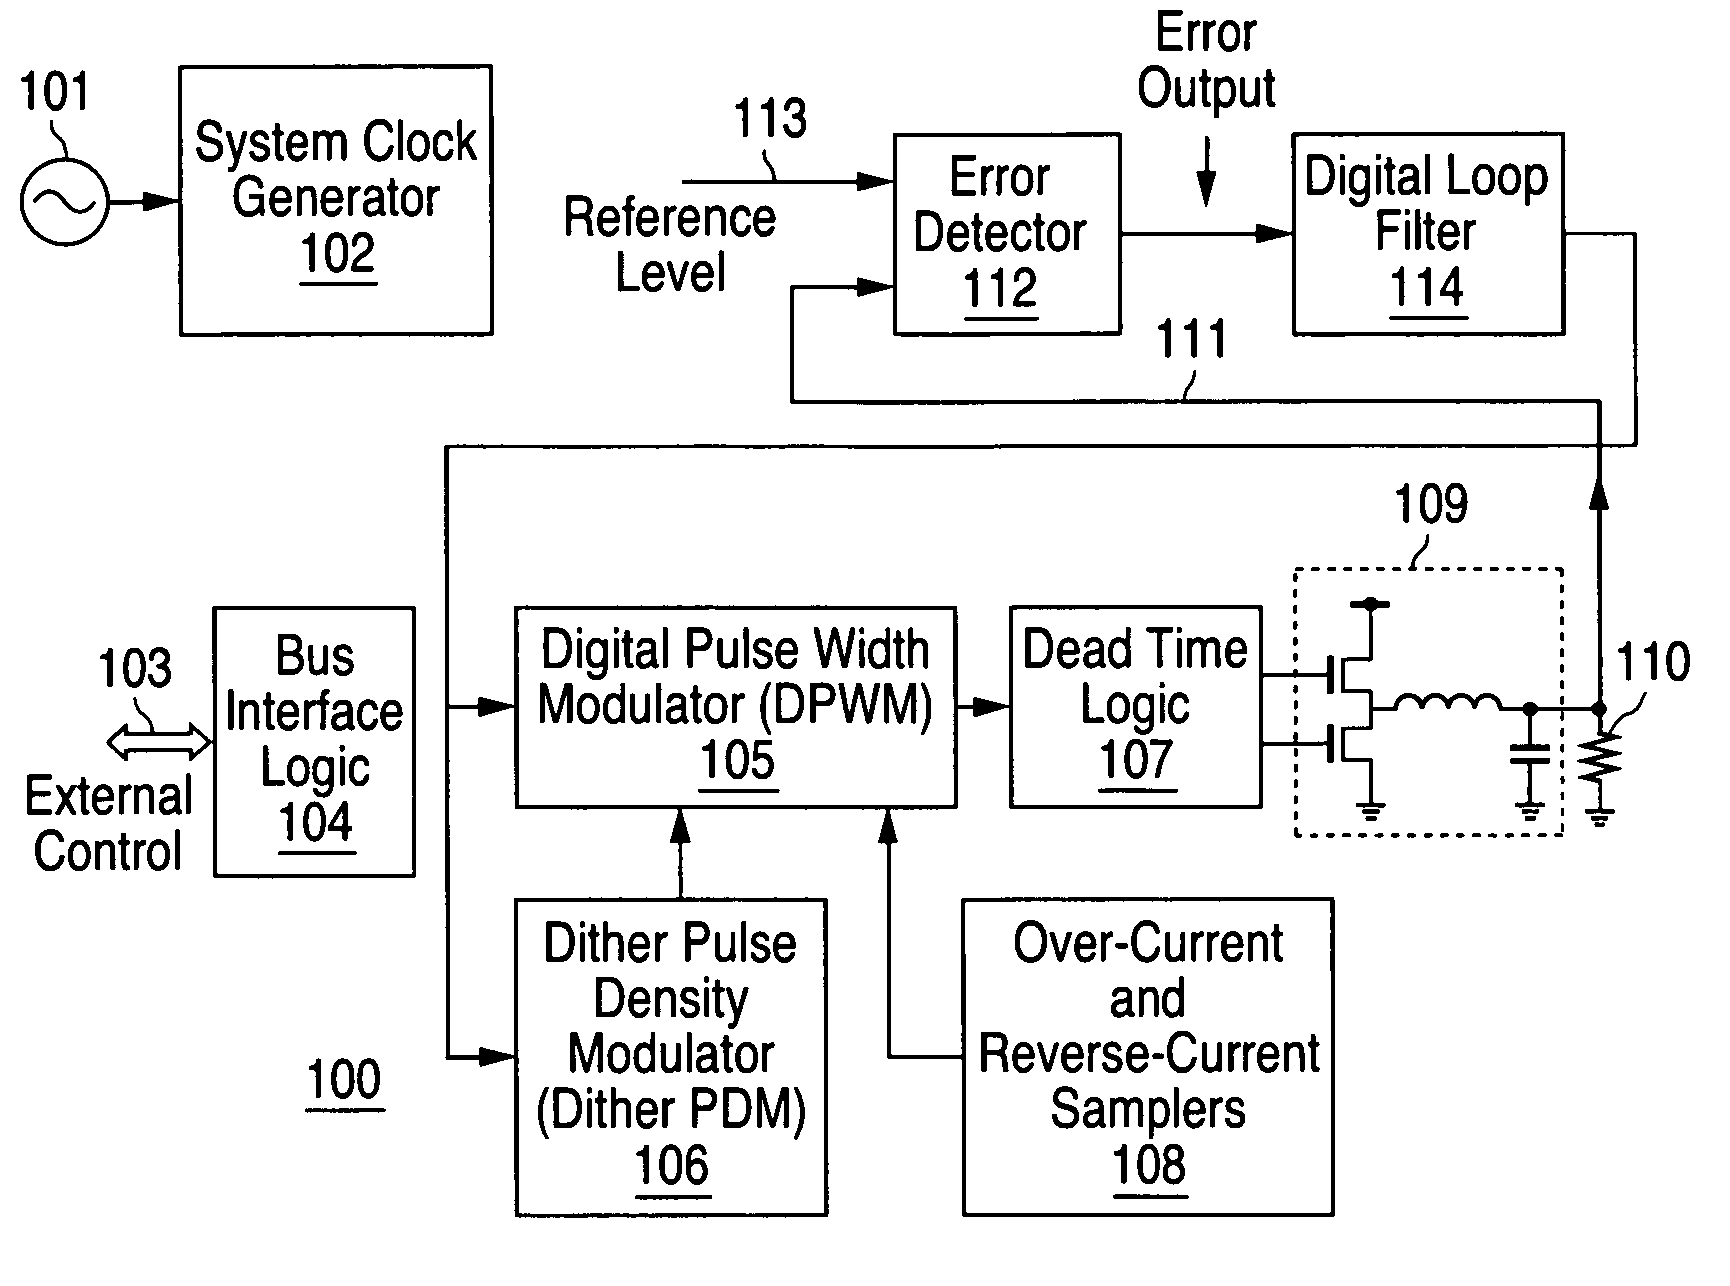 Dither scheme using pulse-density modulation (dither PDM)